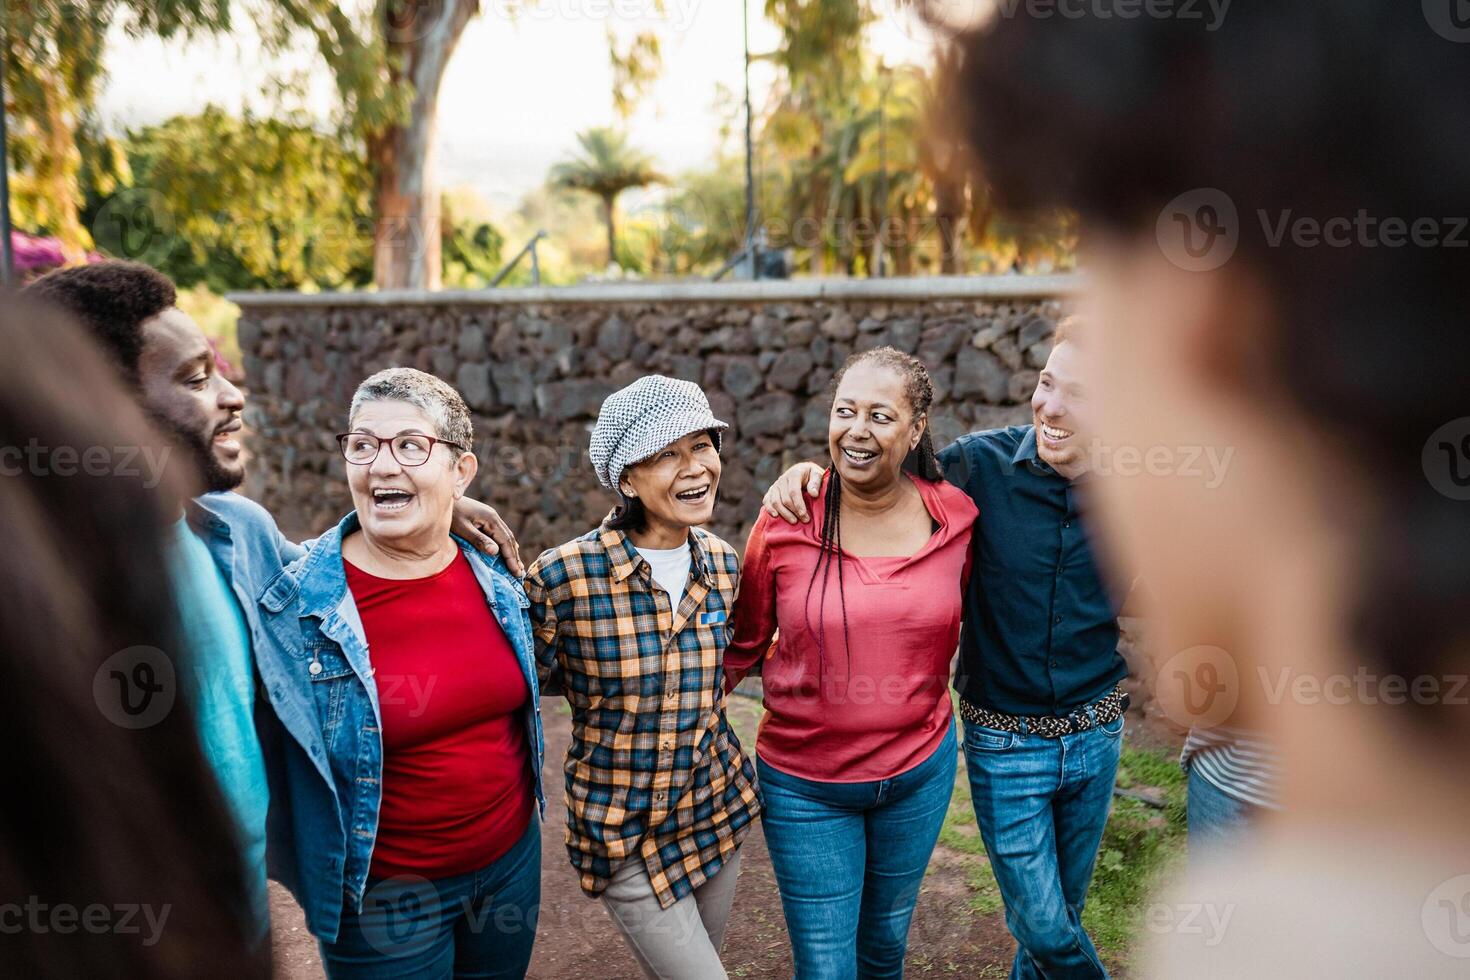 Happy multigenerational group of people with different ethnicities having fun in a public park - People diversity concept photo